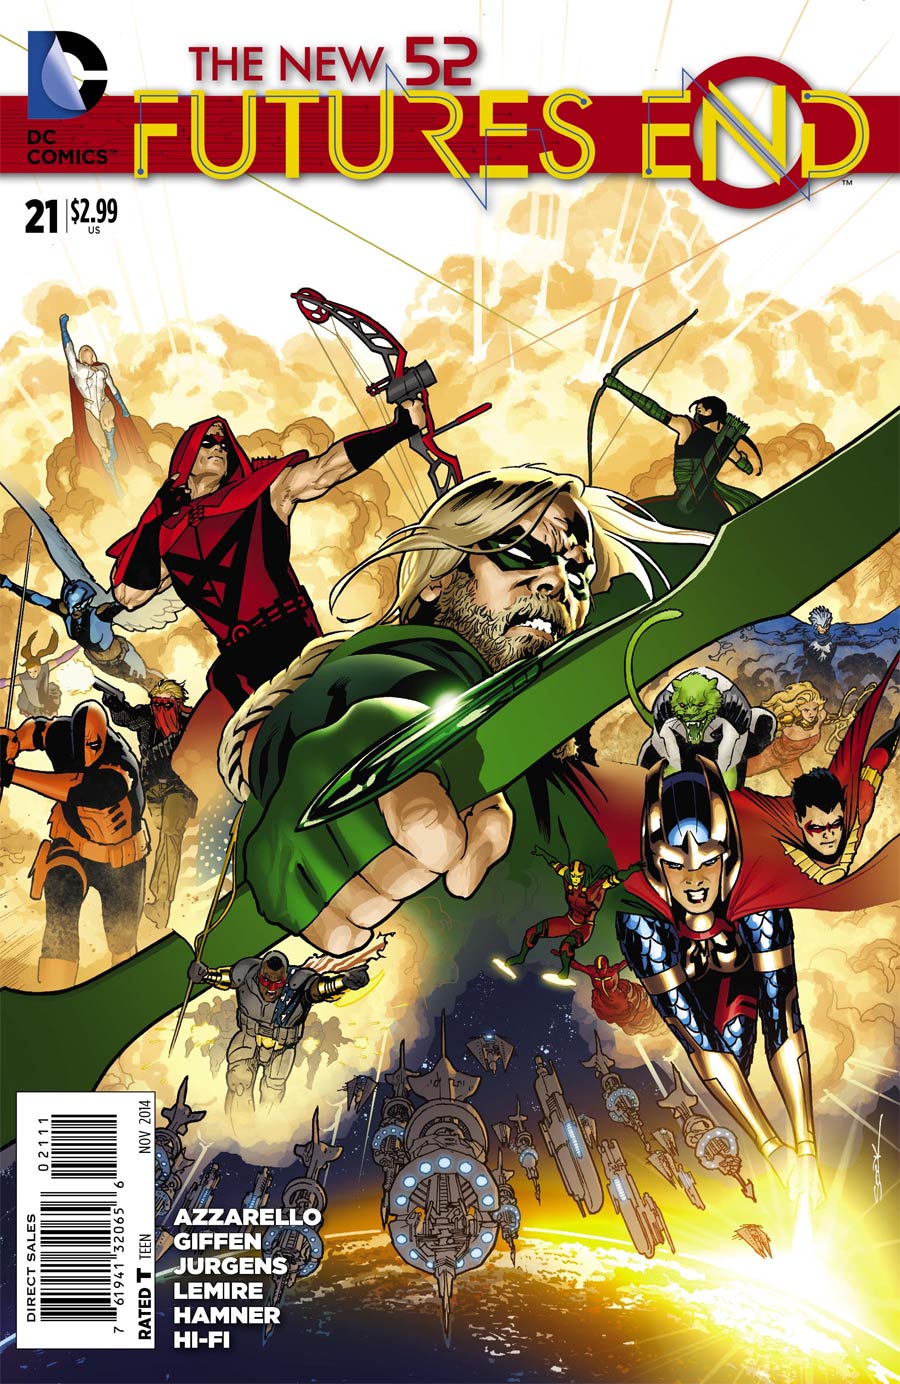 New 52 Futures End #21